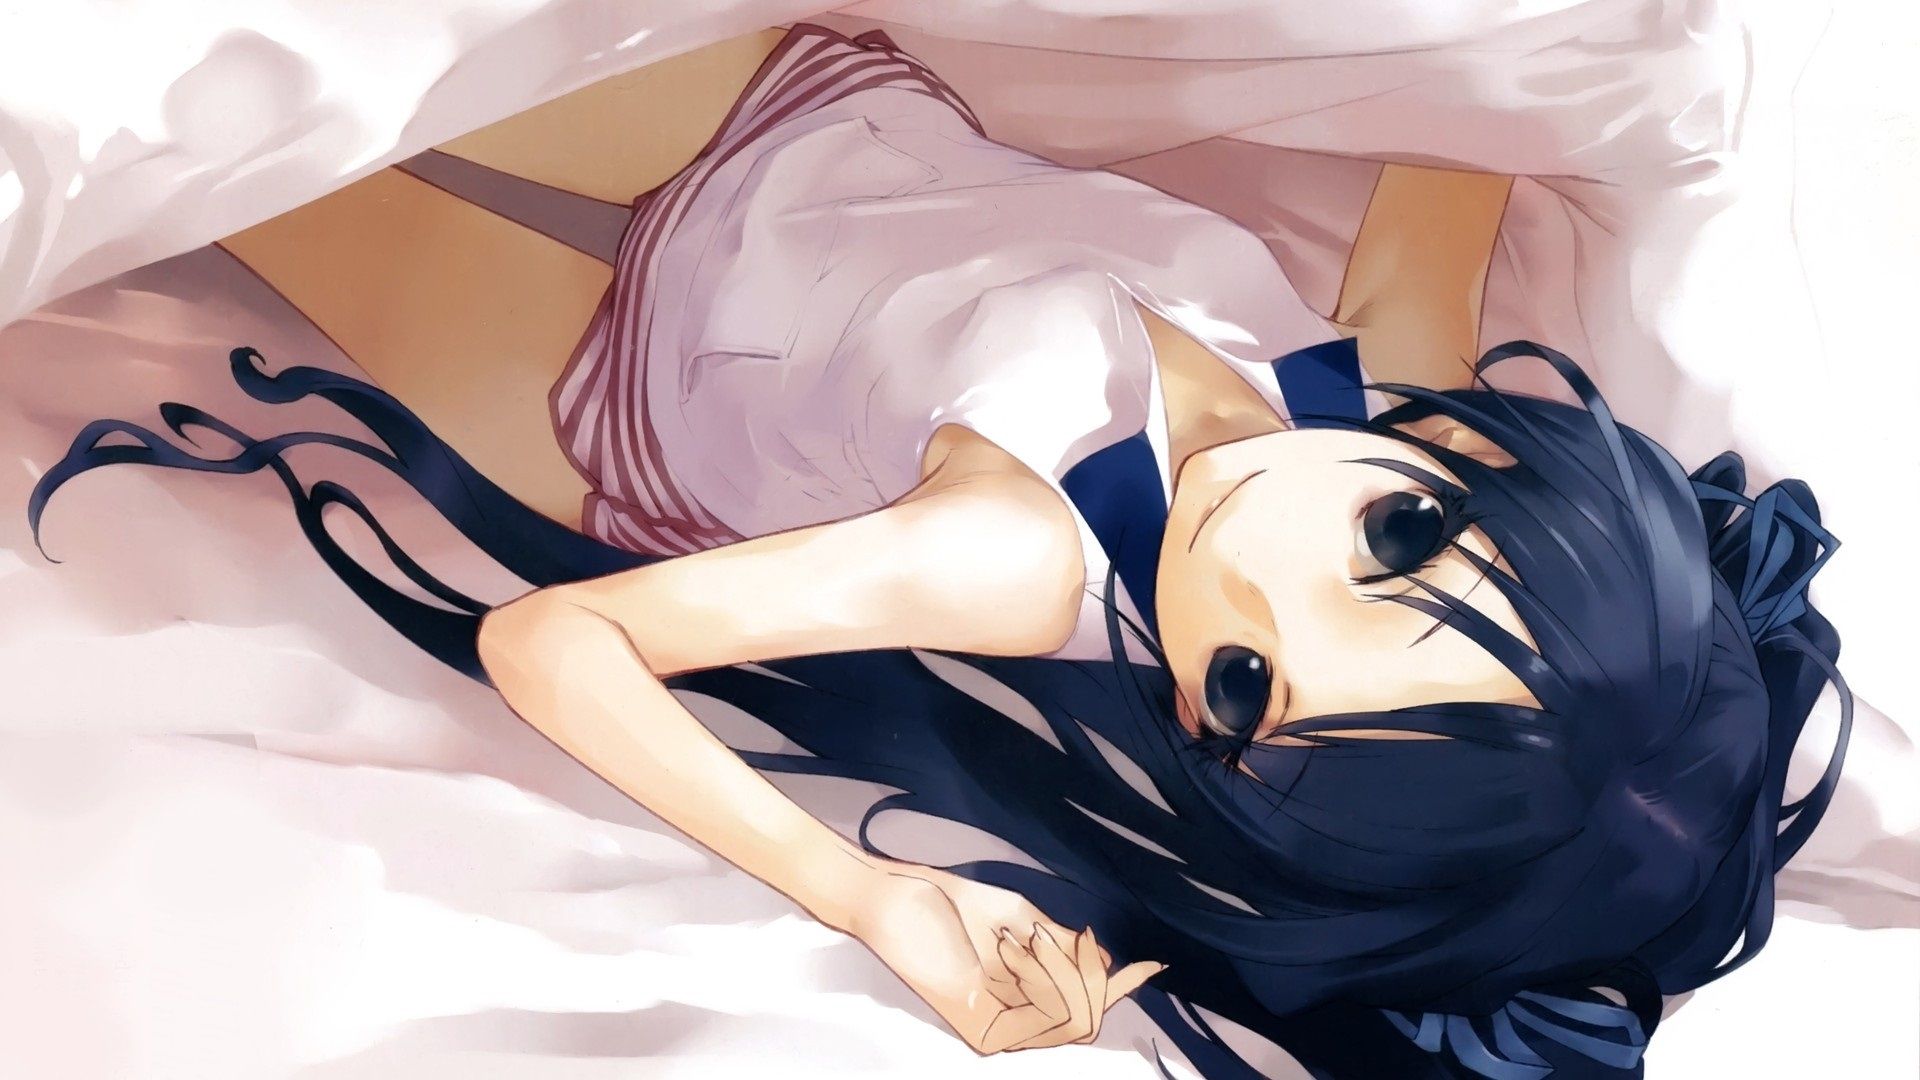 Wallpaper Anime girl sleep in bed 1920x1080 Full HD 2K Picture, Image